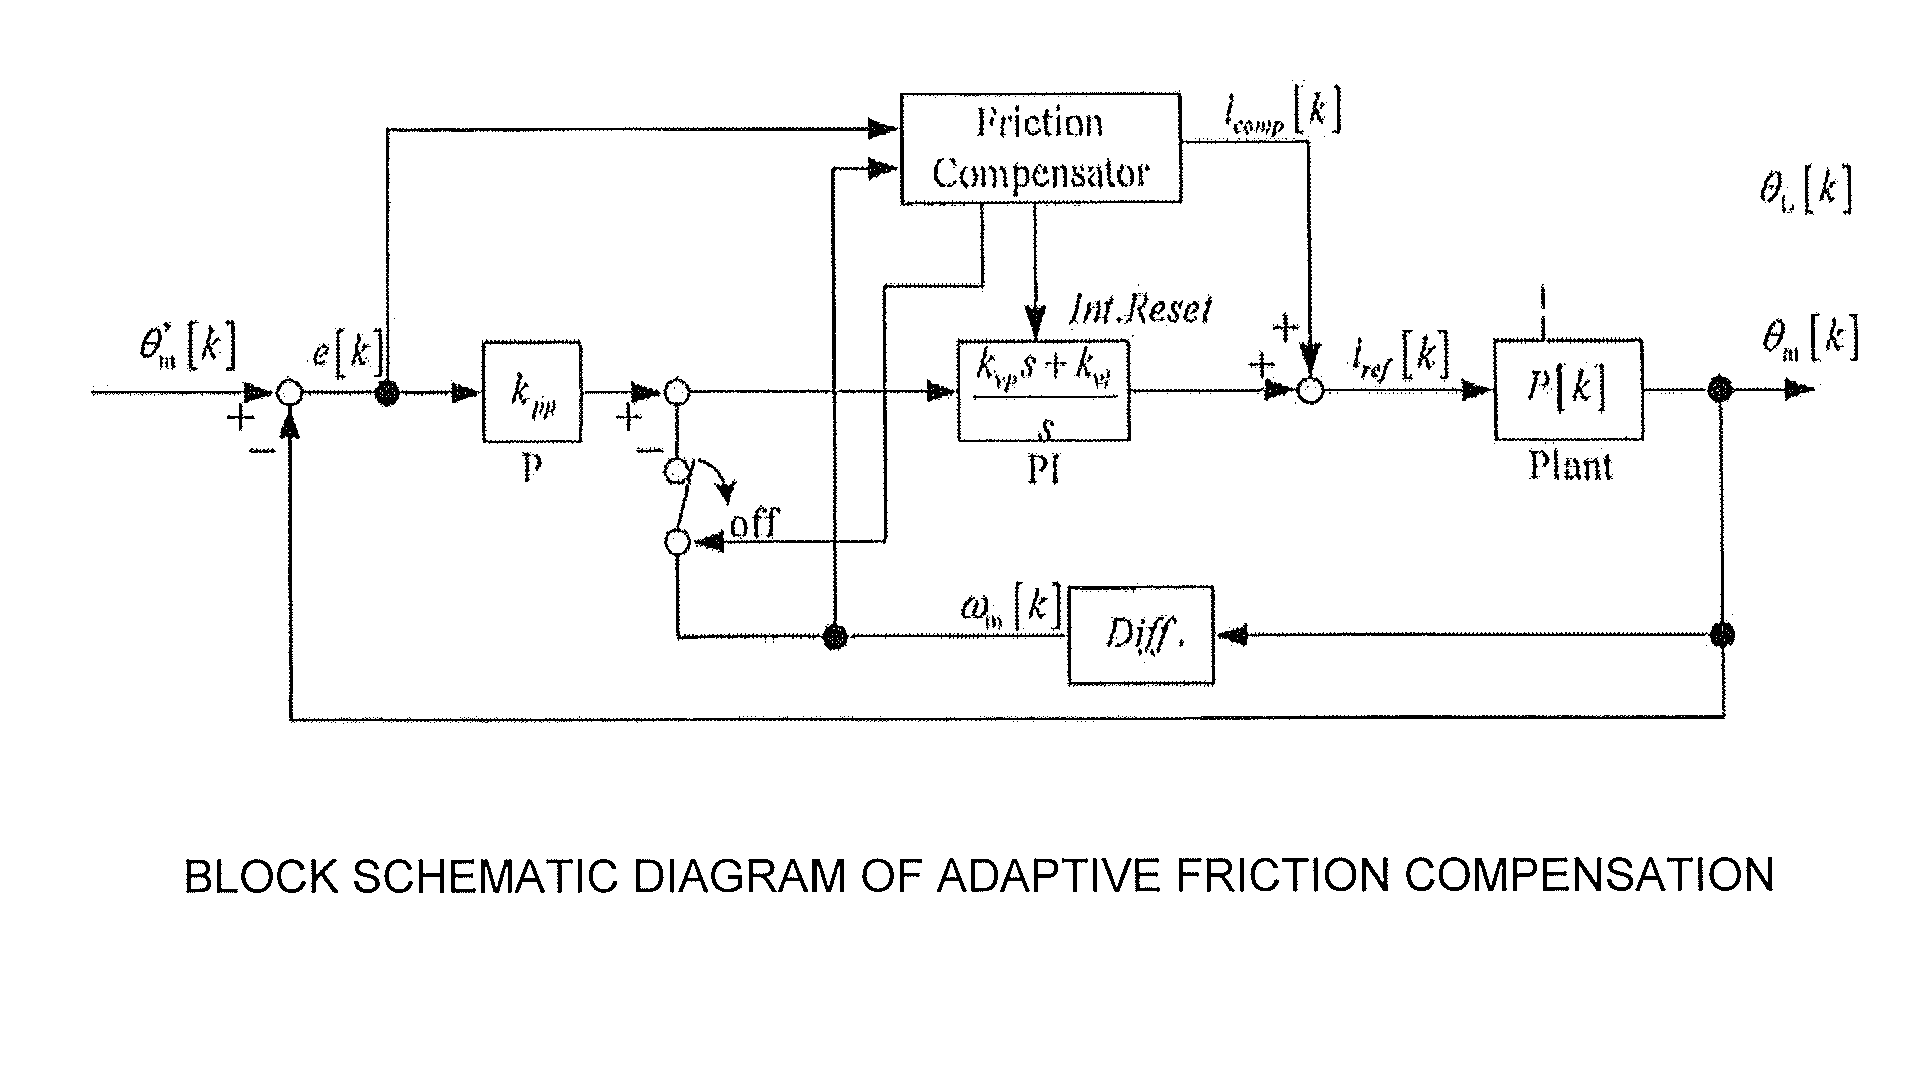 Method for performing adaptive friction compensation in an actuator accounting for variation in friction characteristics of wave gear drive accompanying change in temperature